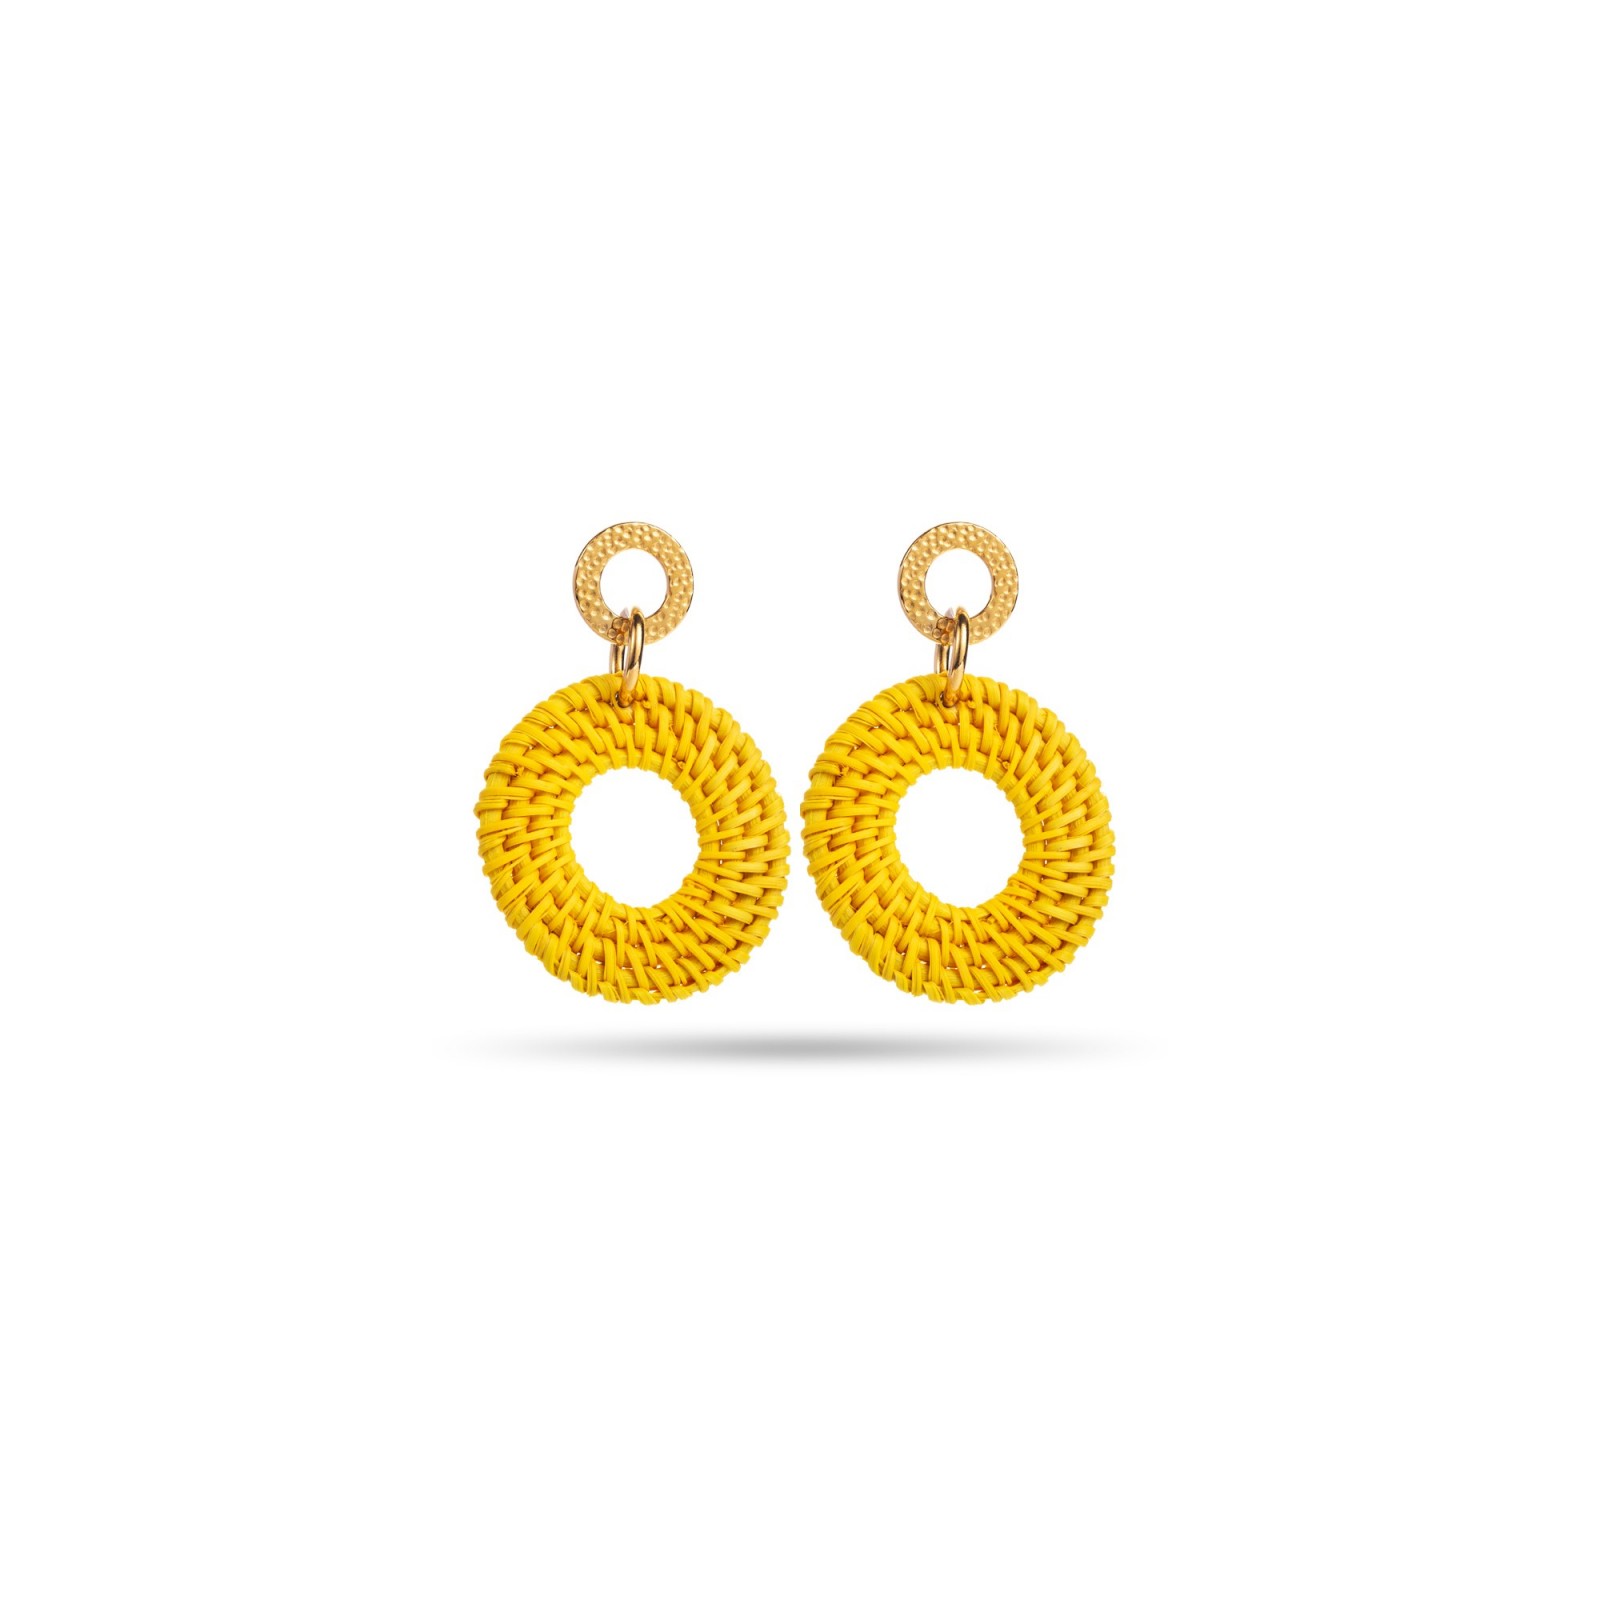 Round Braided Raphia Earrings Color:Yellow